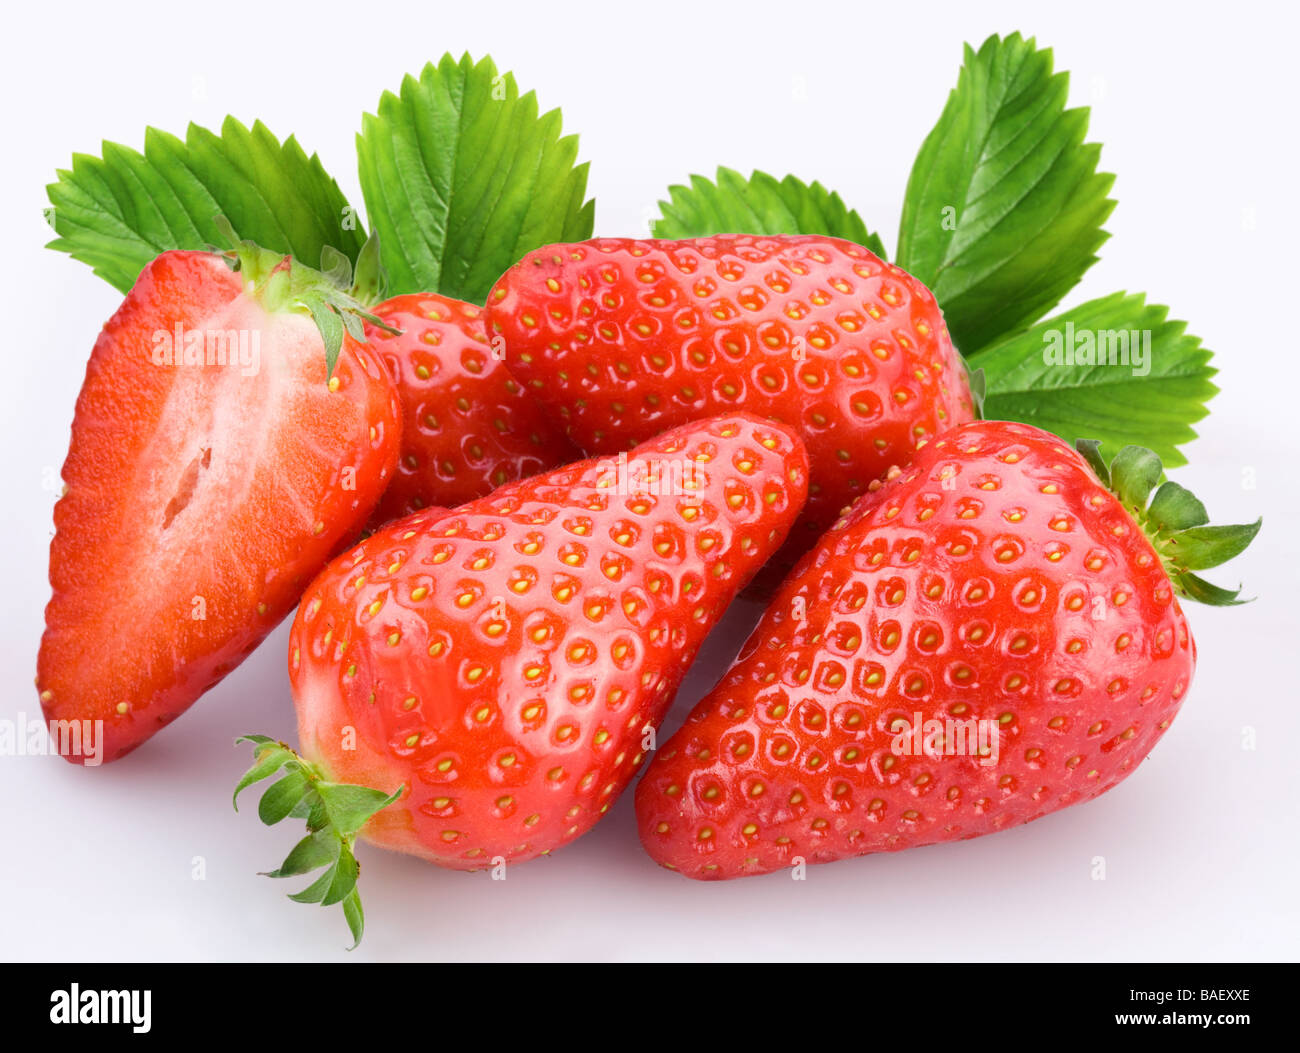 Berries of strawberry on a white background Stock Photo